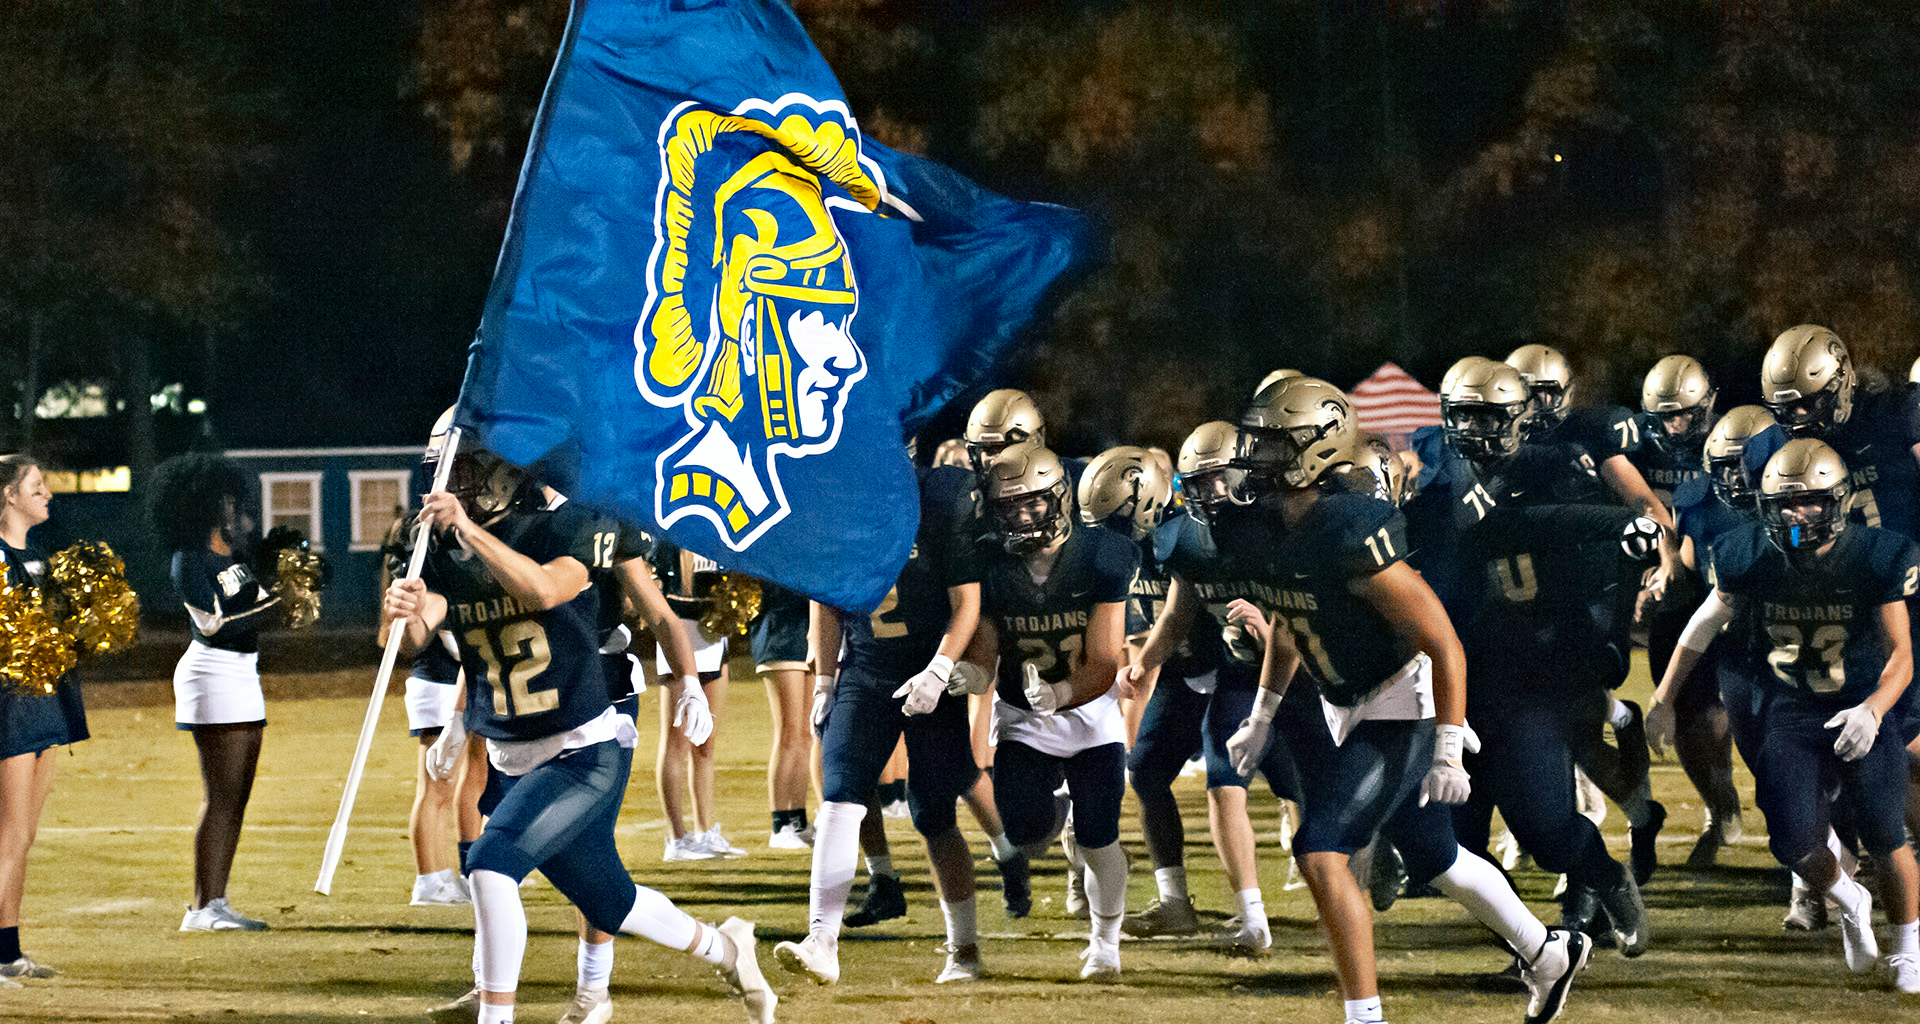 Football team run on to the field with a flag